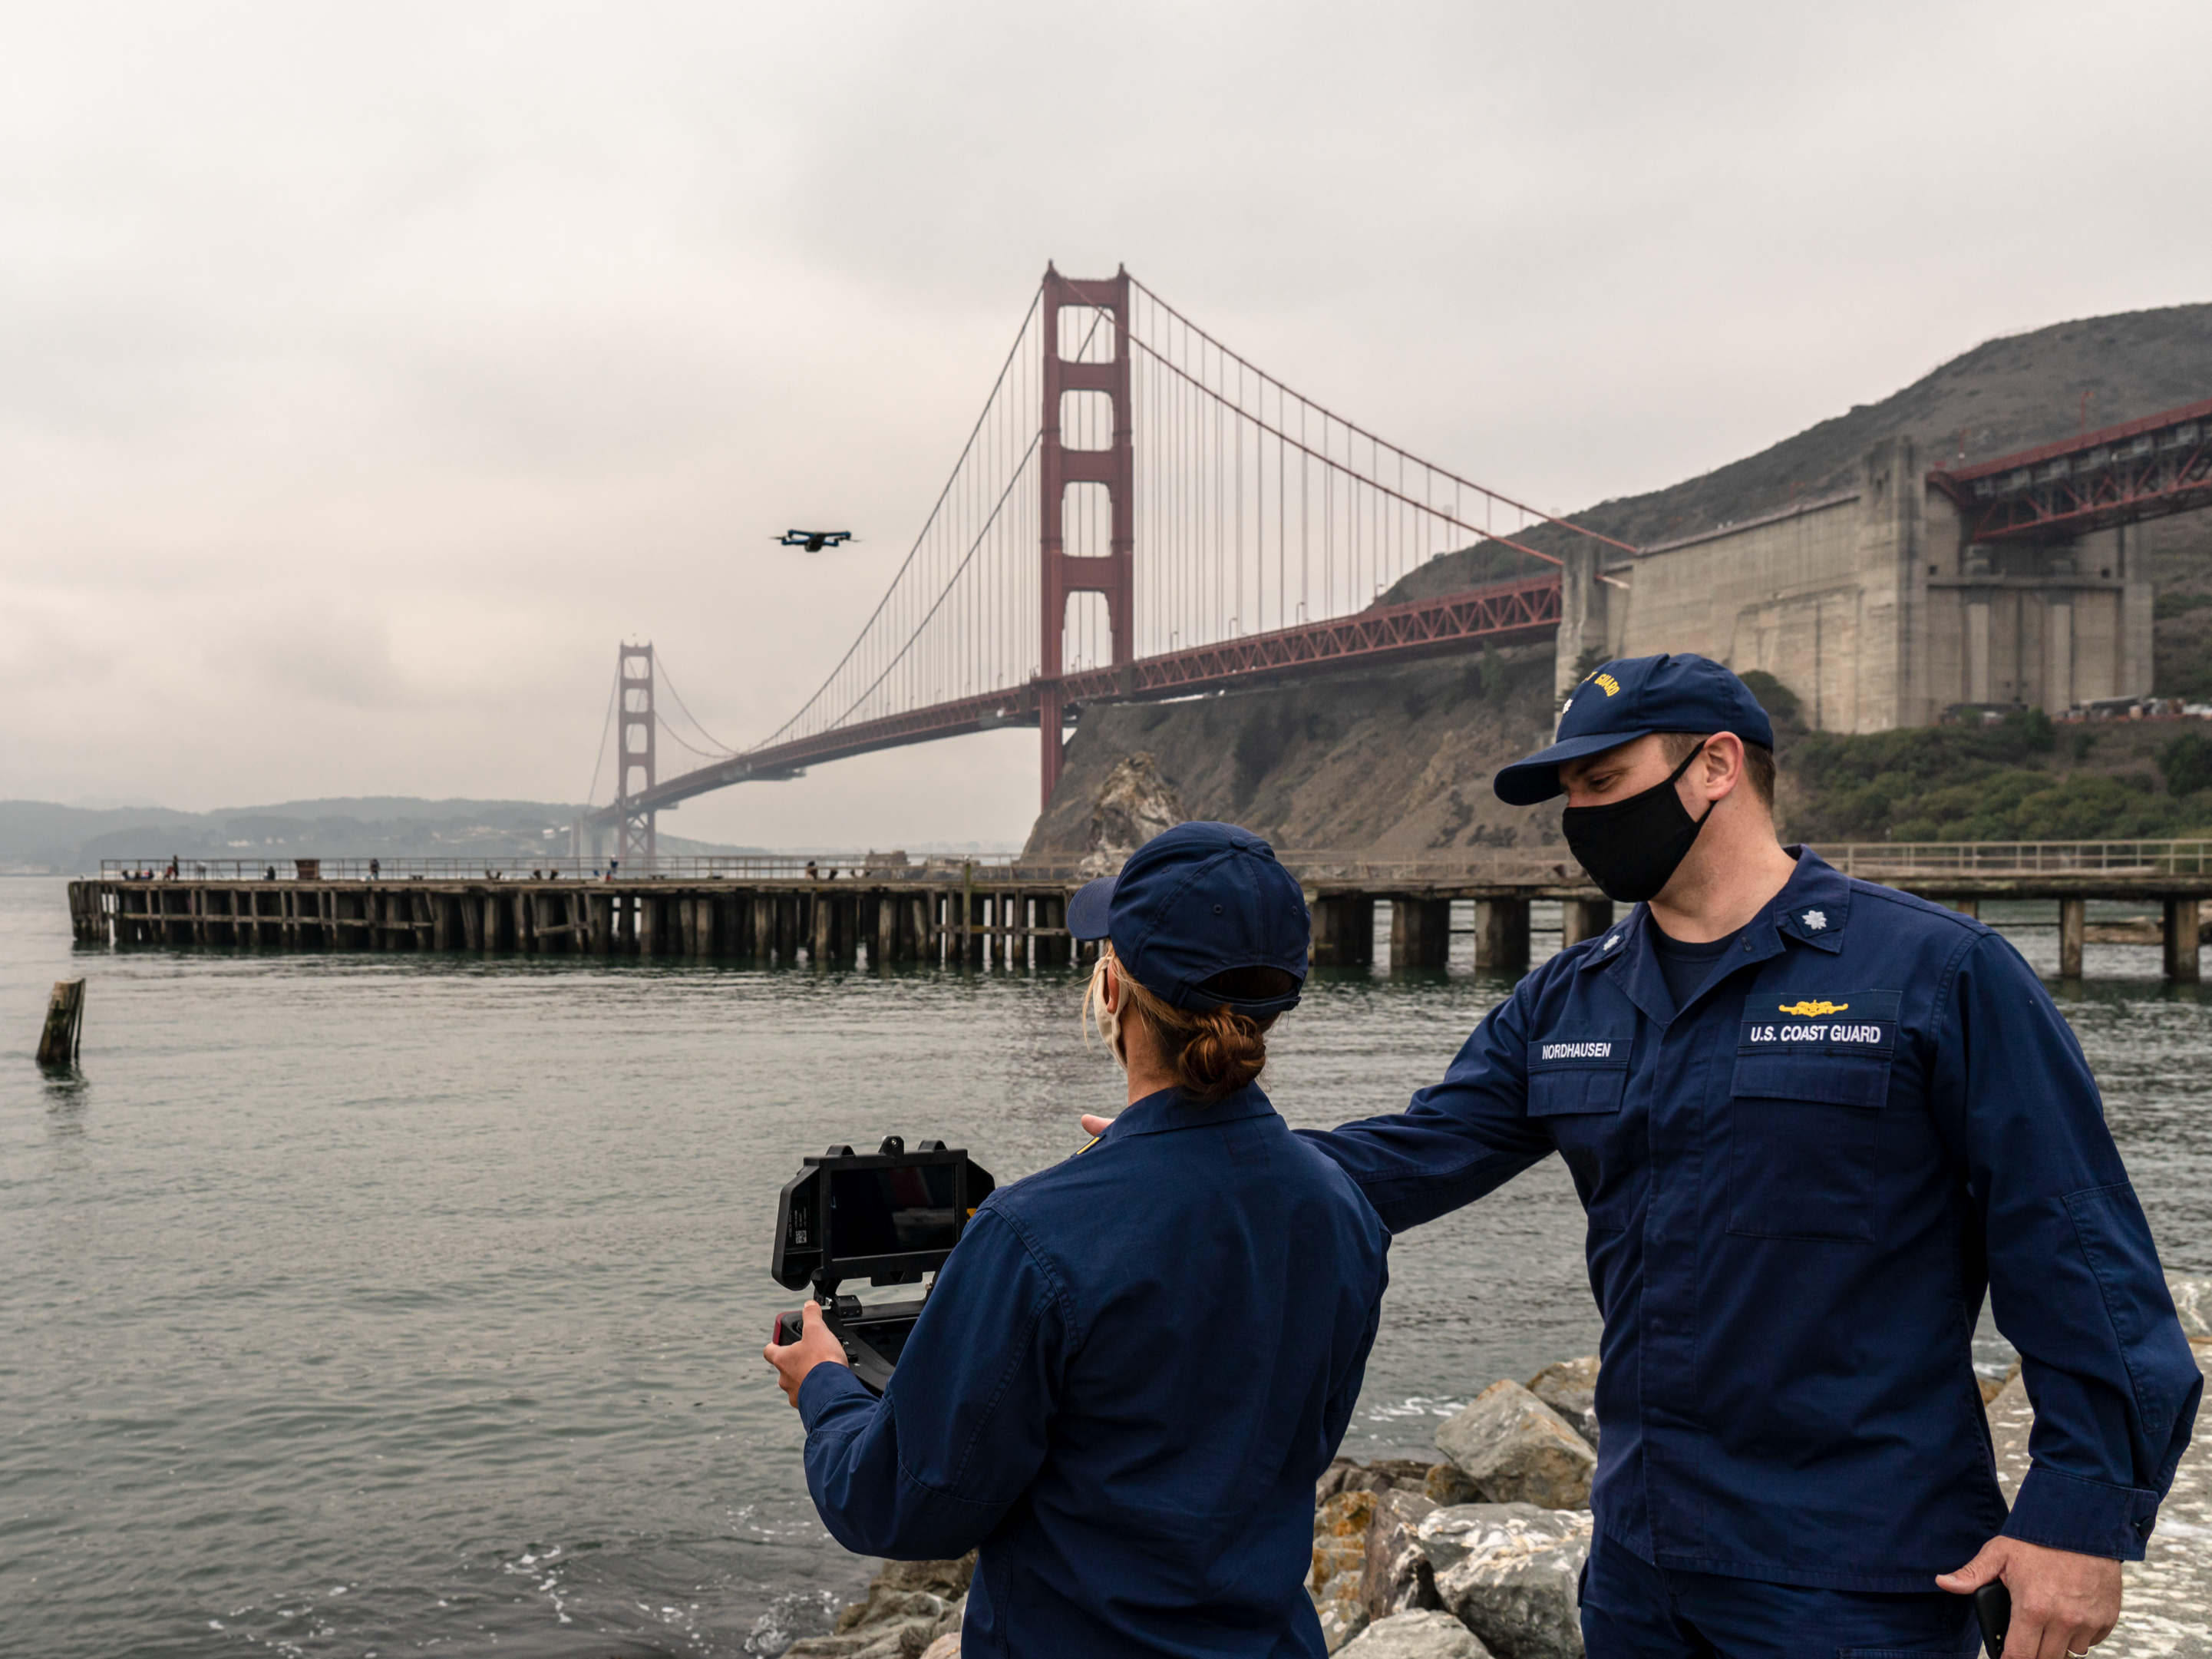 Defense Innovation Unit liaison Cmdr. Michael Nordhausen and Ensign Sarah Levesque, a Coast Guard certified drone operator from the Sector San Francisco Enforcement Division, conduct evaluations of blue small unmanned aircraft system technology. Photo courtesy of Defense Innovation Unit.